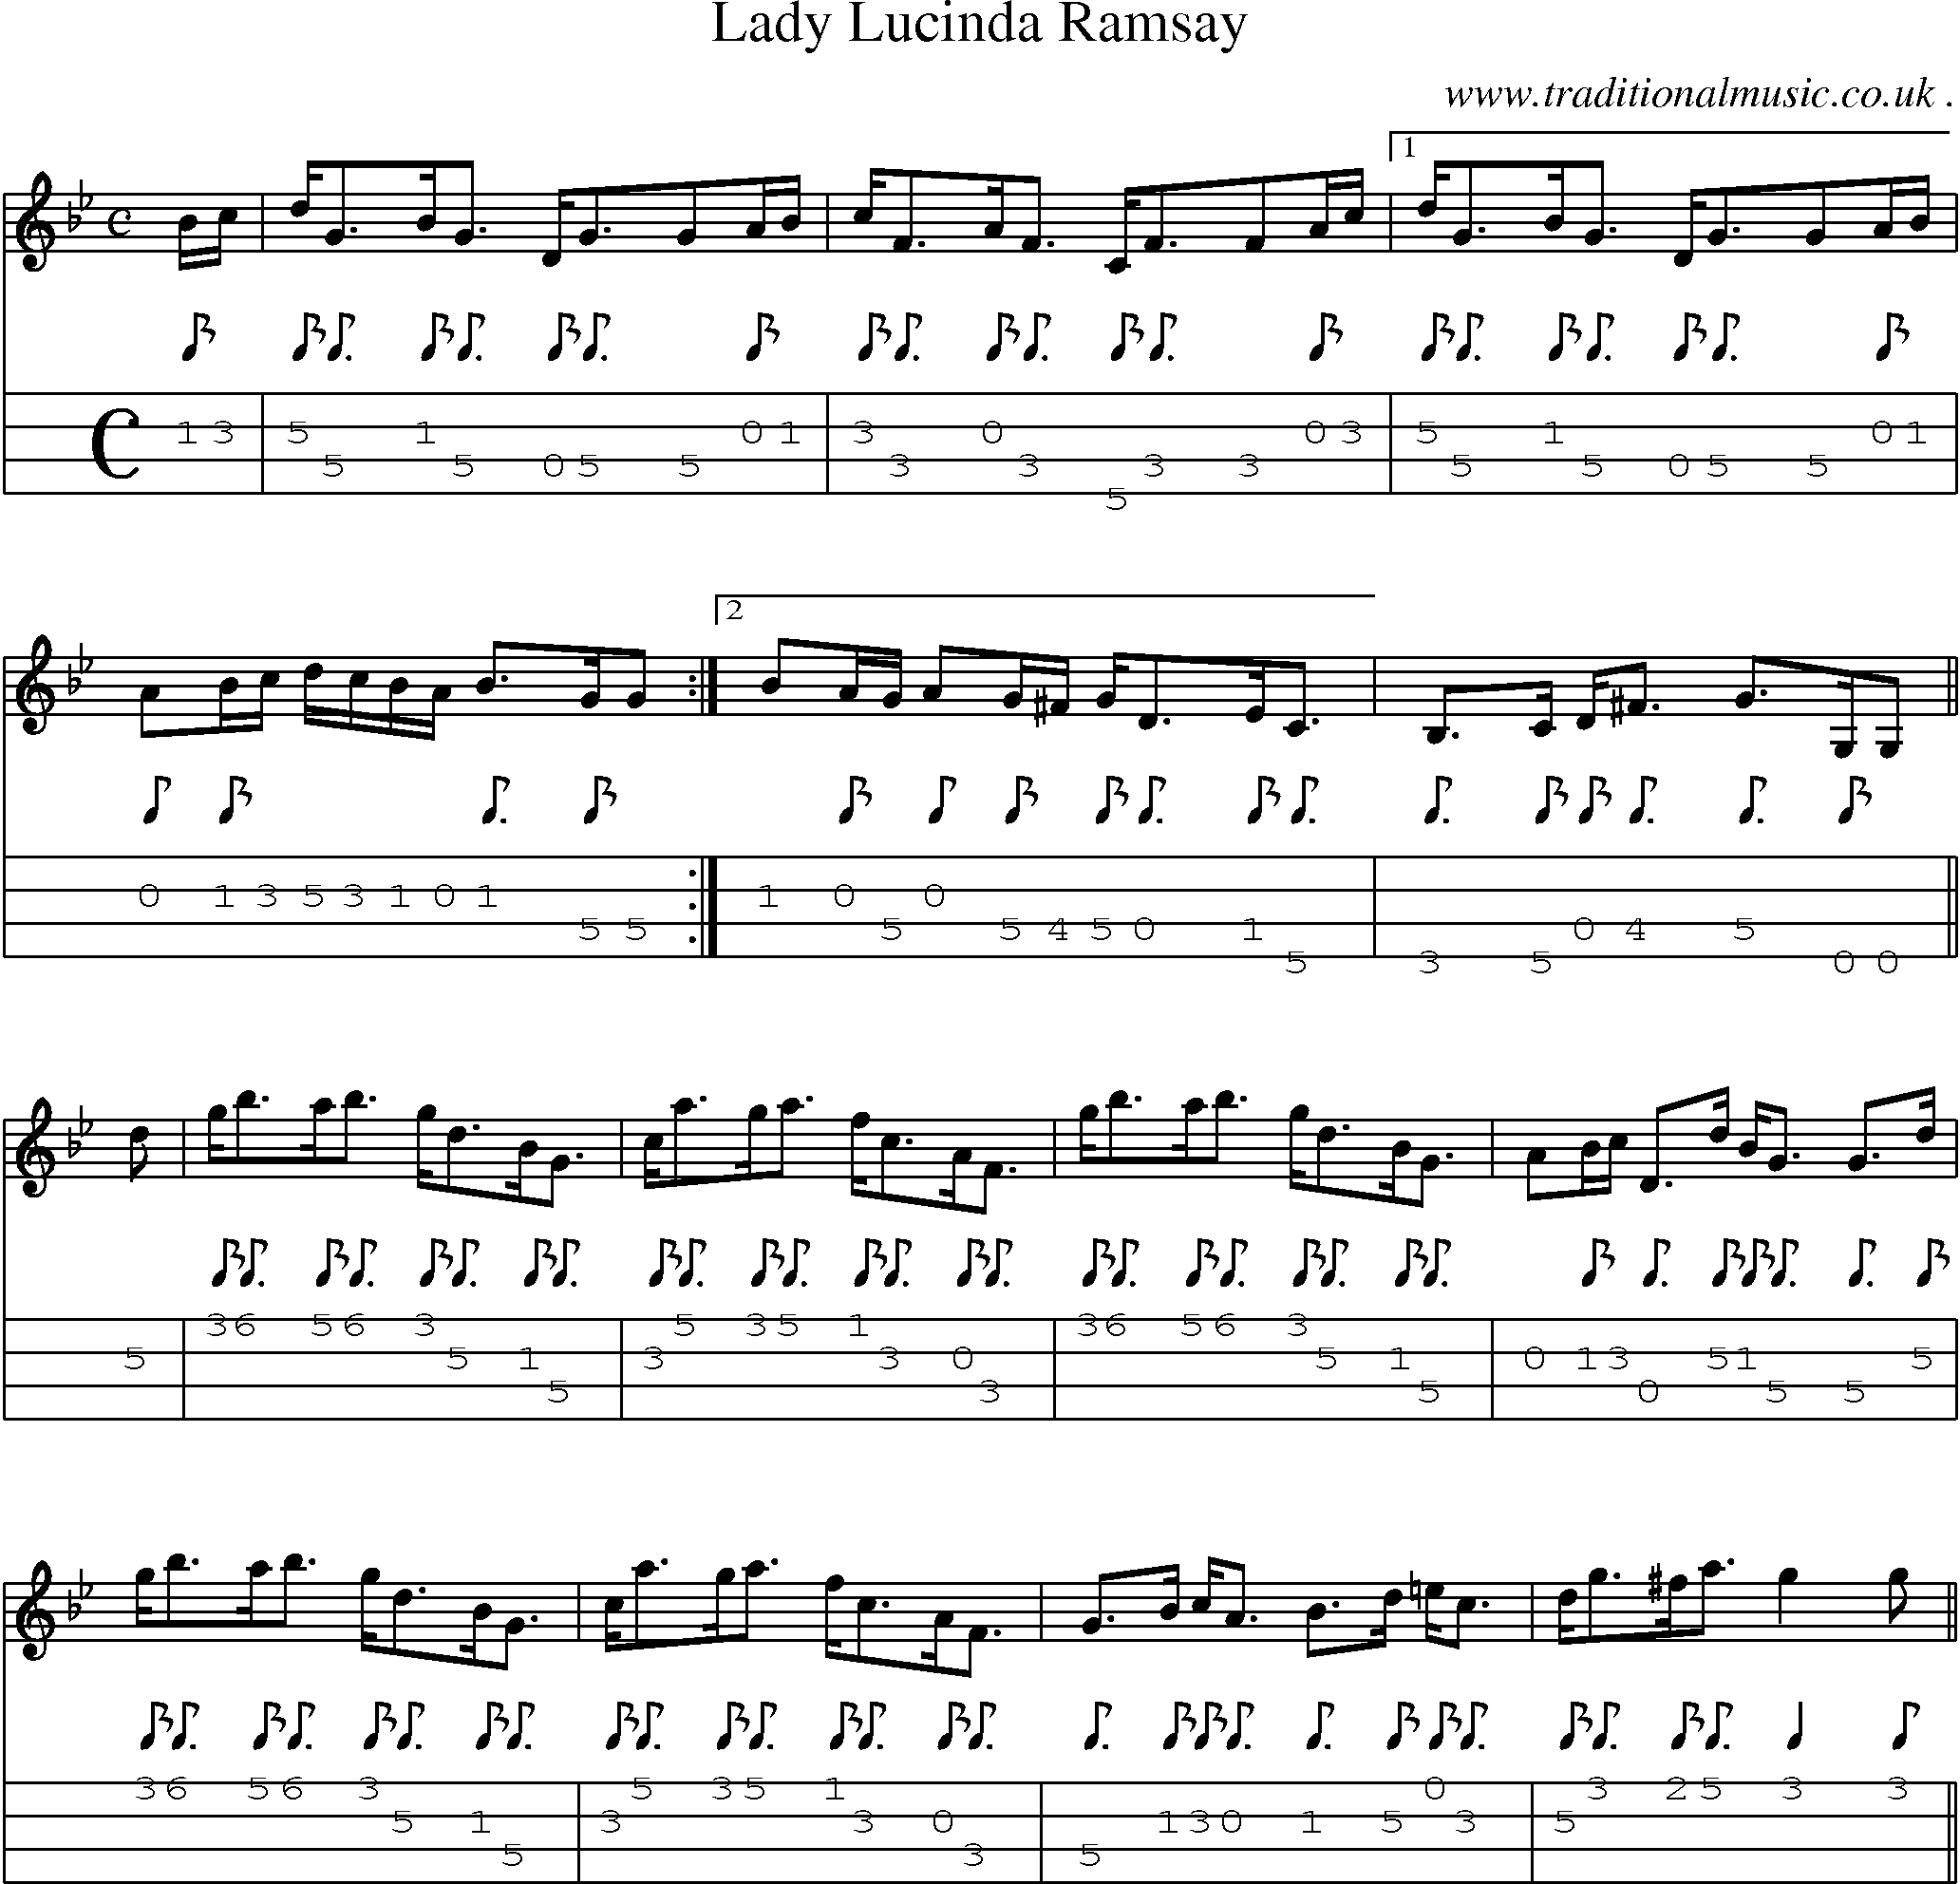 Sheet-music  score, Chords and Mandolin Tabs for Lady Lucinda Ramsay